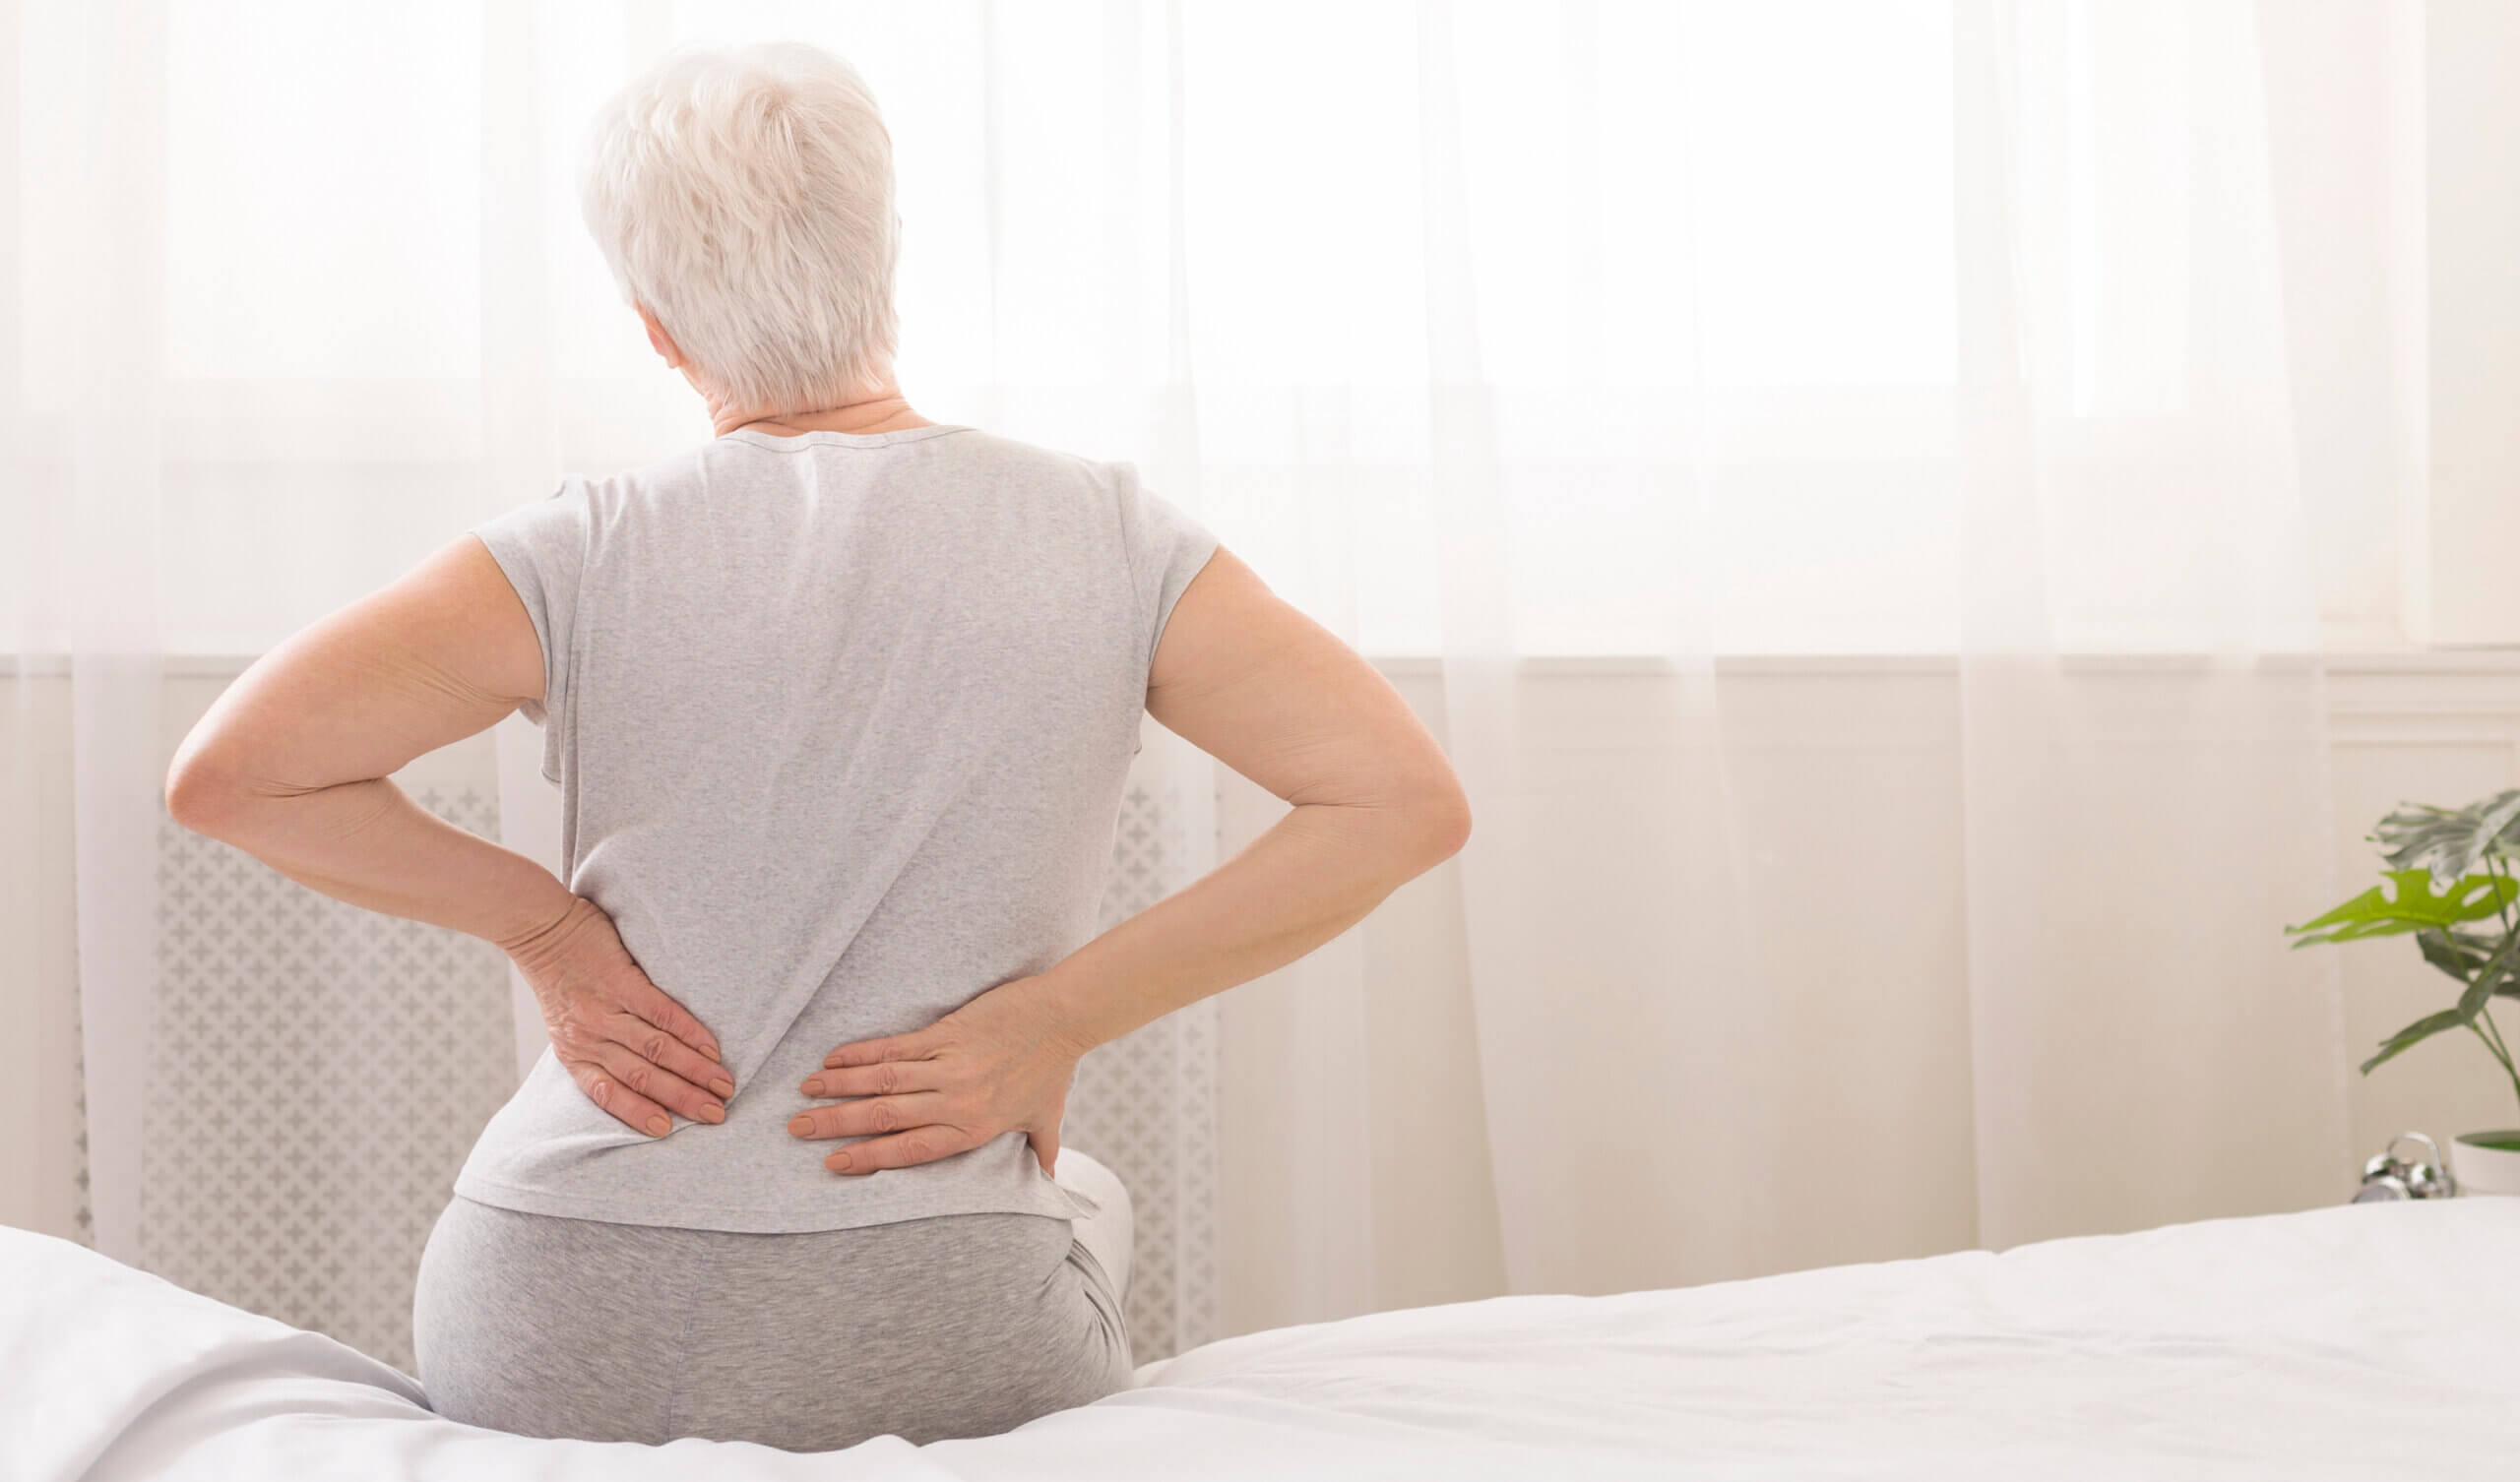 5 Ways Physical Therapy Helps In Lower Back Pain Relief